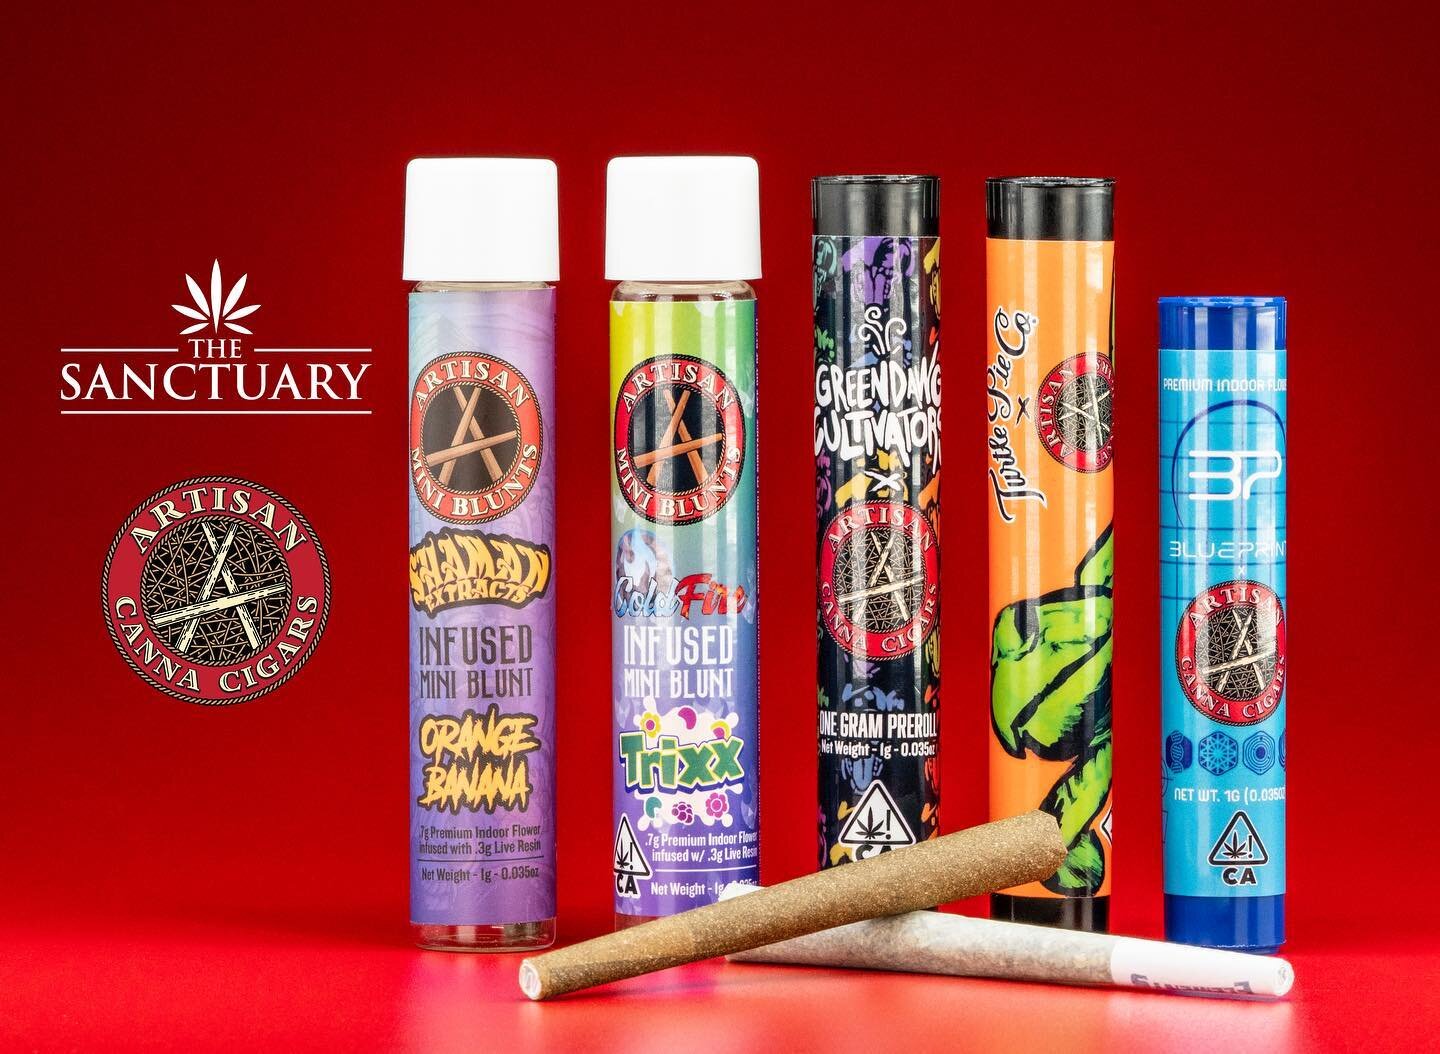 Artisan Infused Mini Blunt &amp; Pre-Roll collabs on deck @thesanctuaryca!